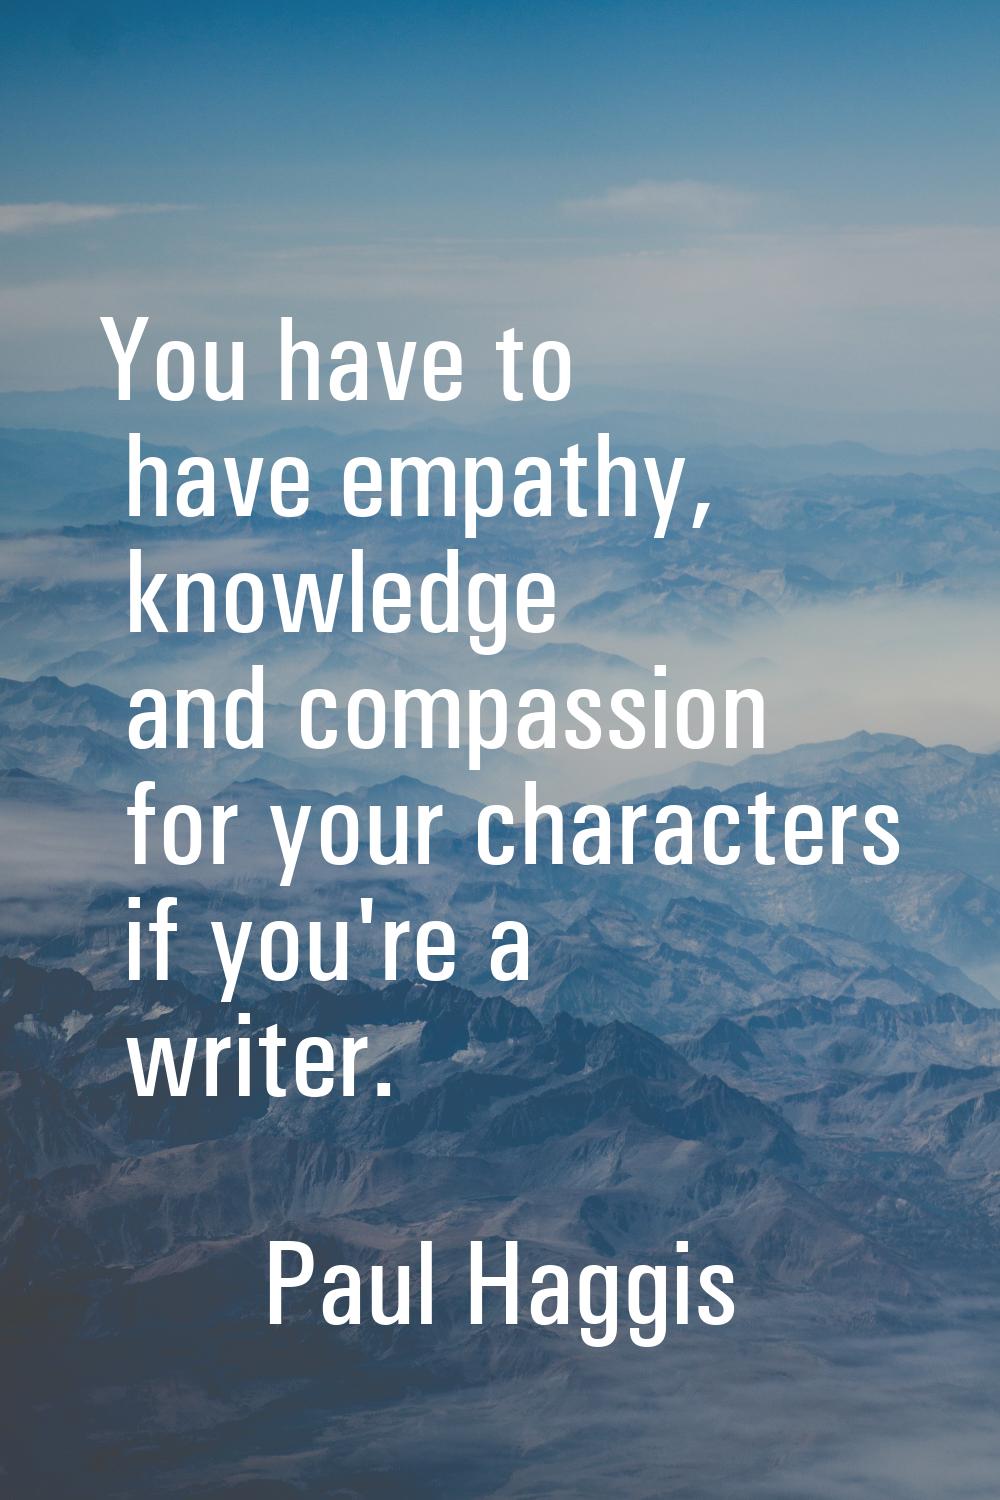 You have to have empathy, knowledge and compassion for your characters if you're a writer.